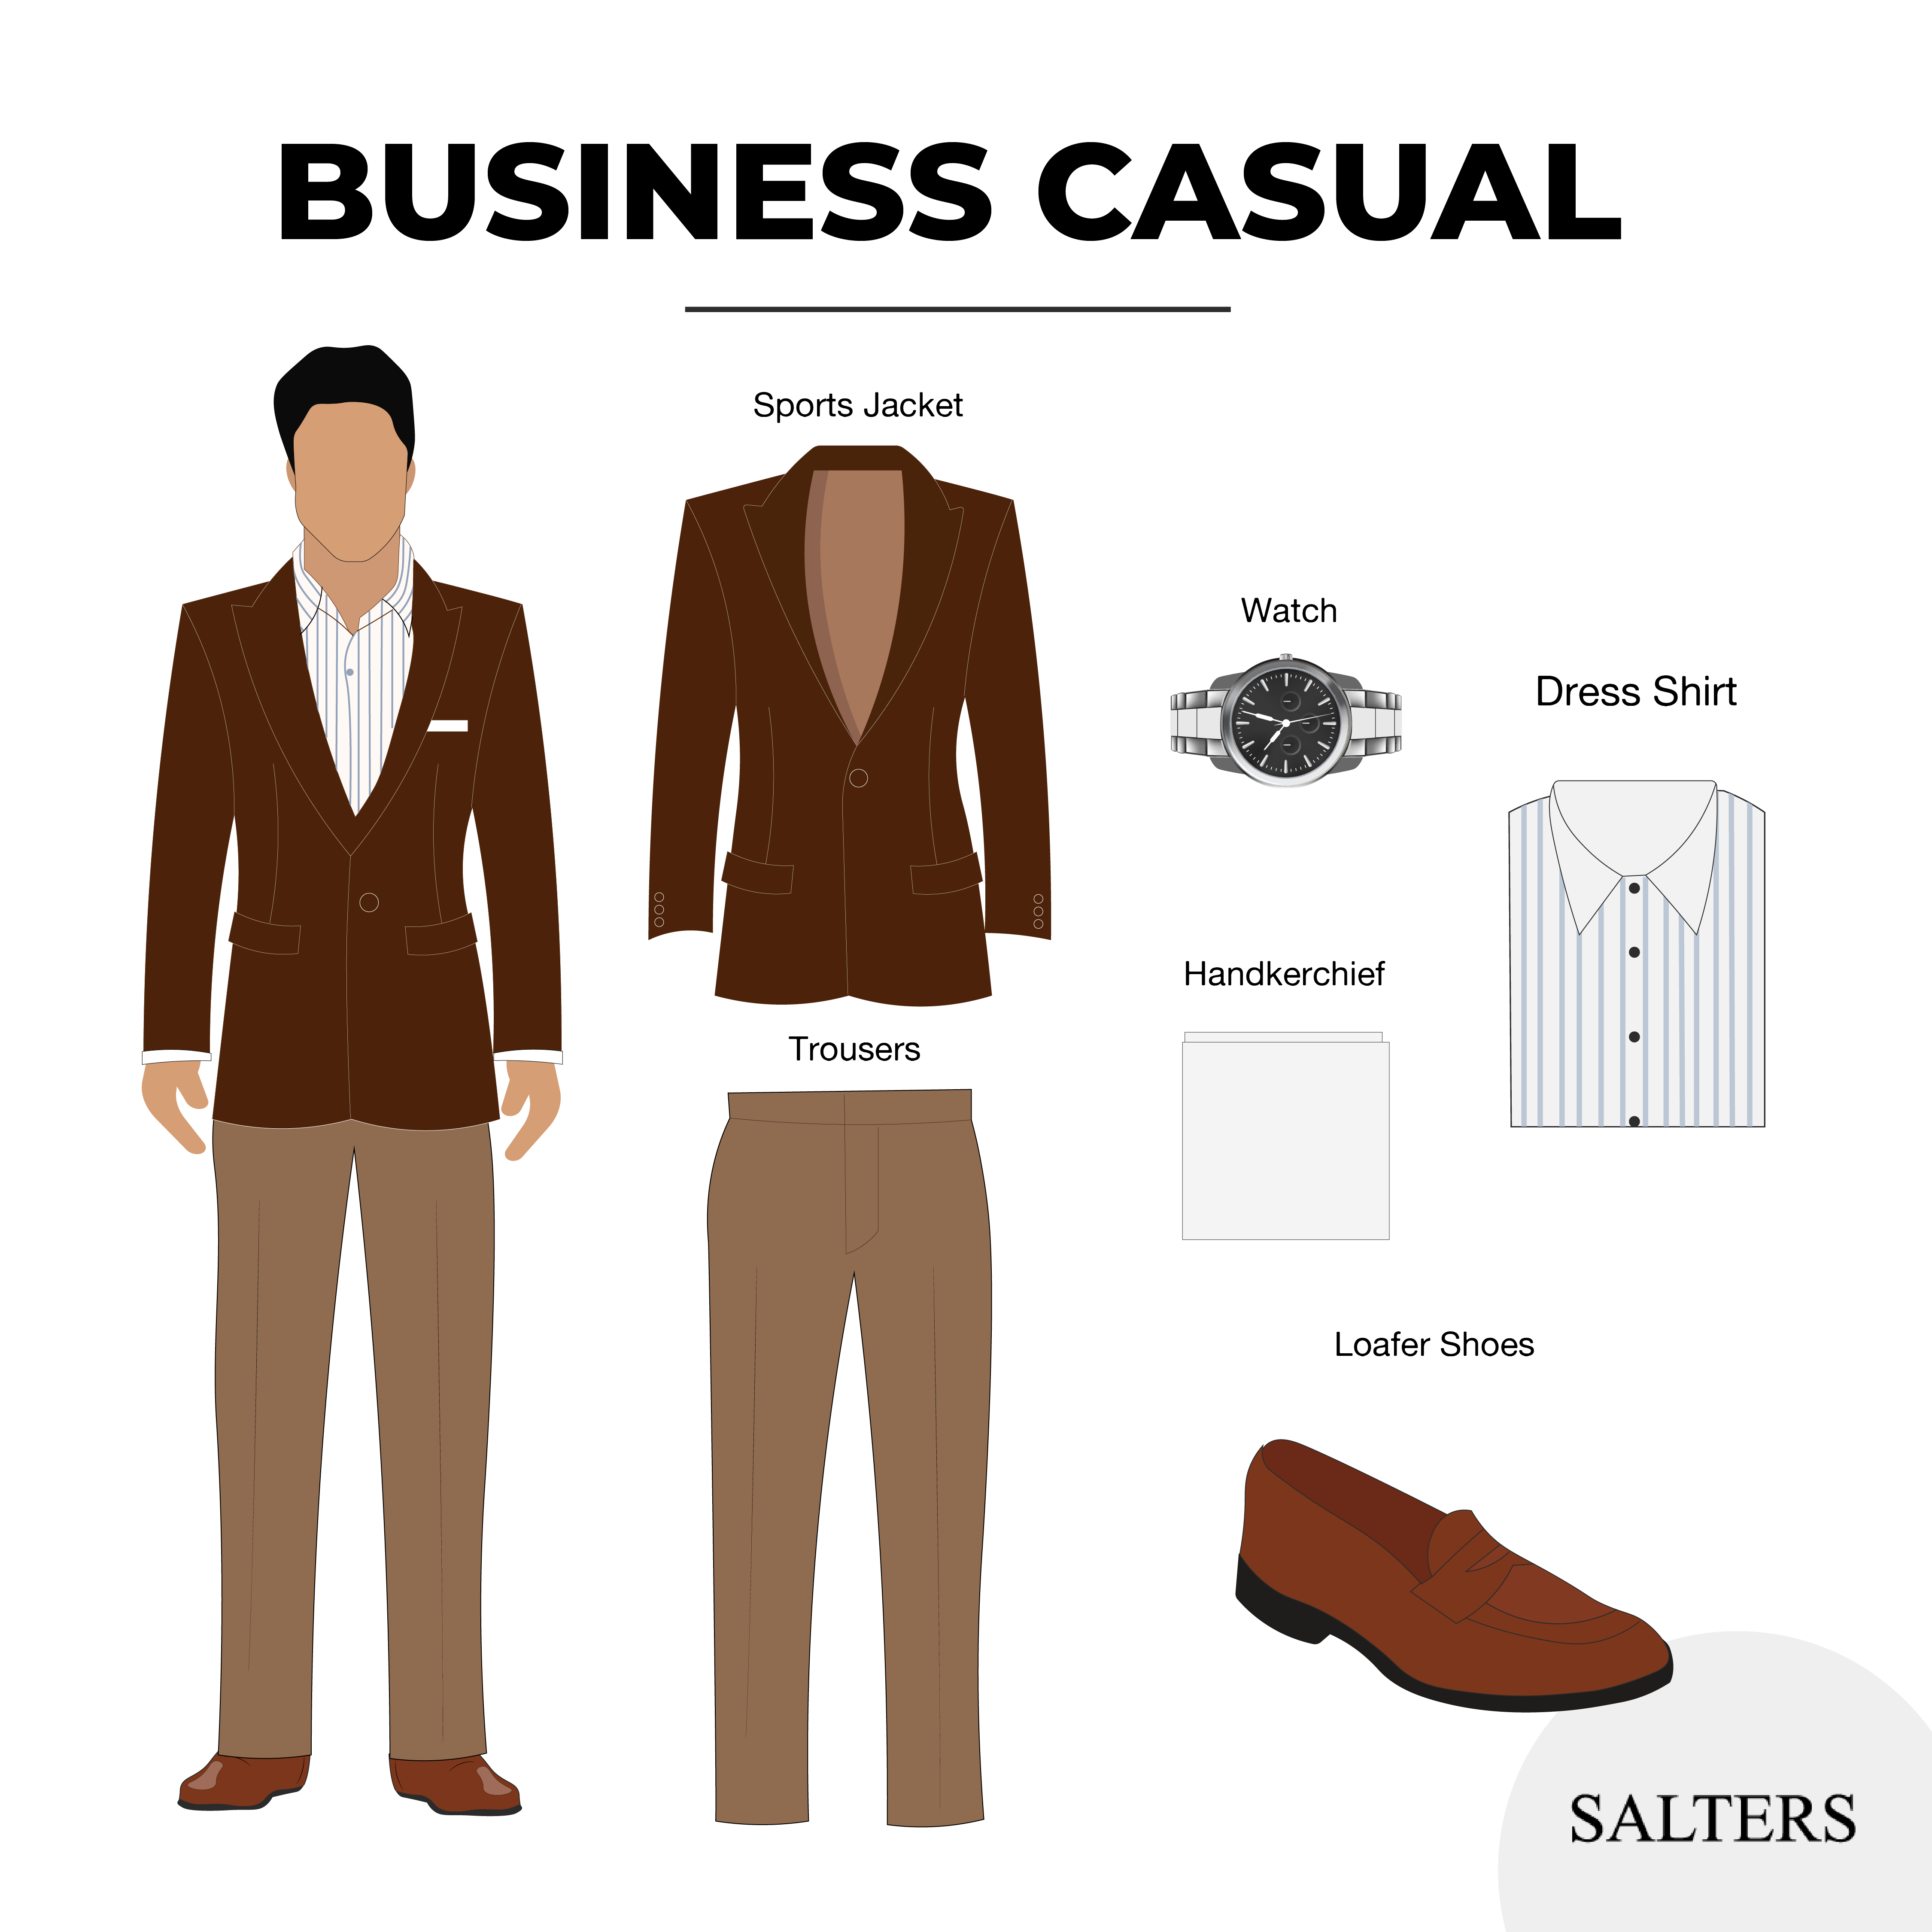 The meaning of Business Casual